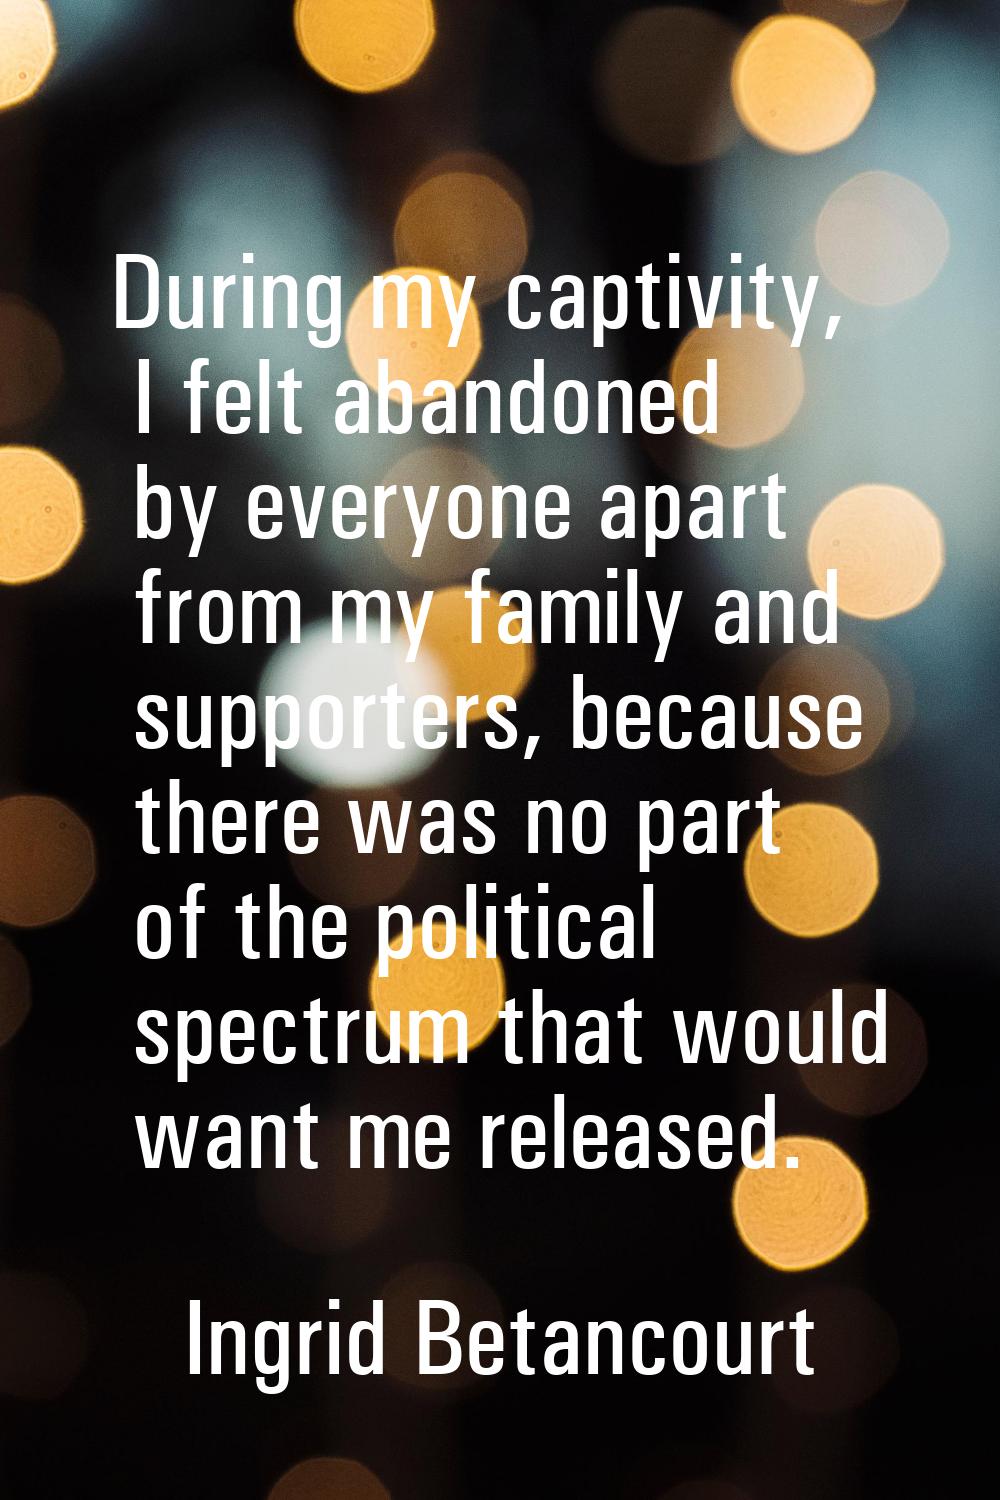 During my captivity, I felt abandoned by everyone apart from my family and supporters, because ther